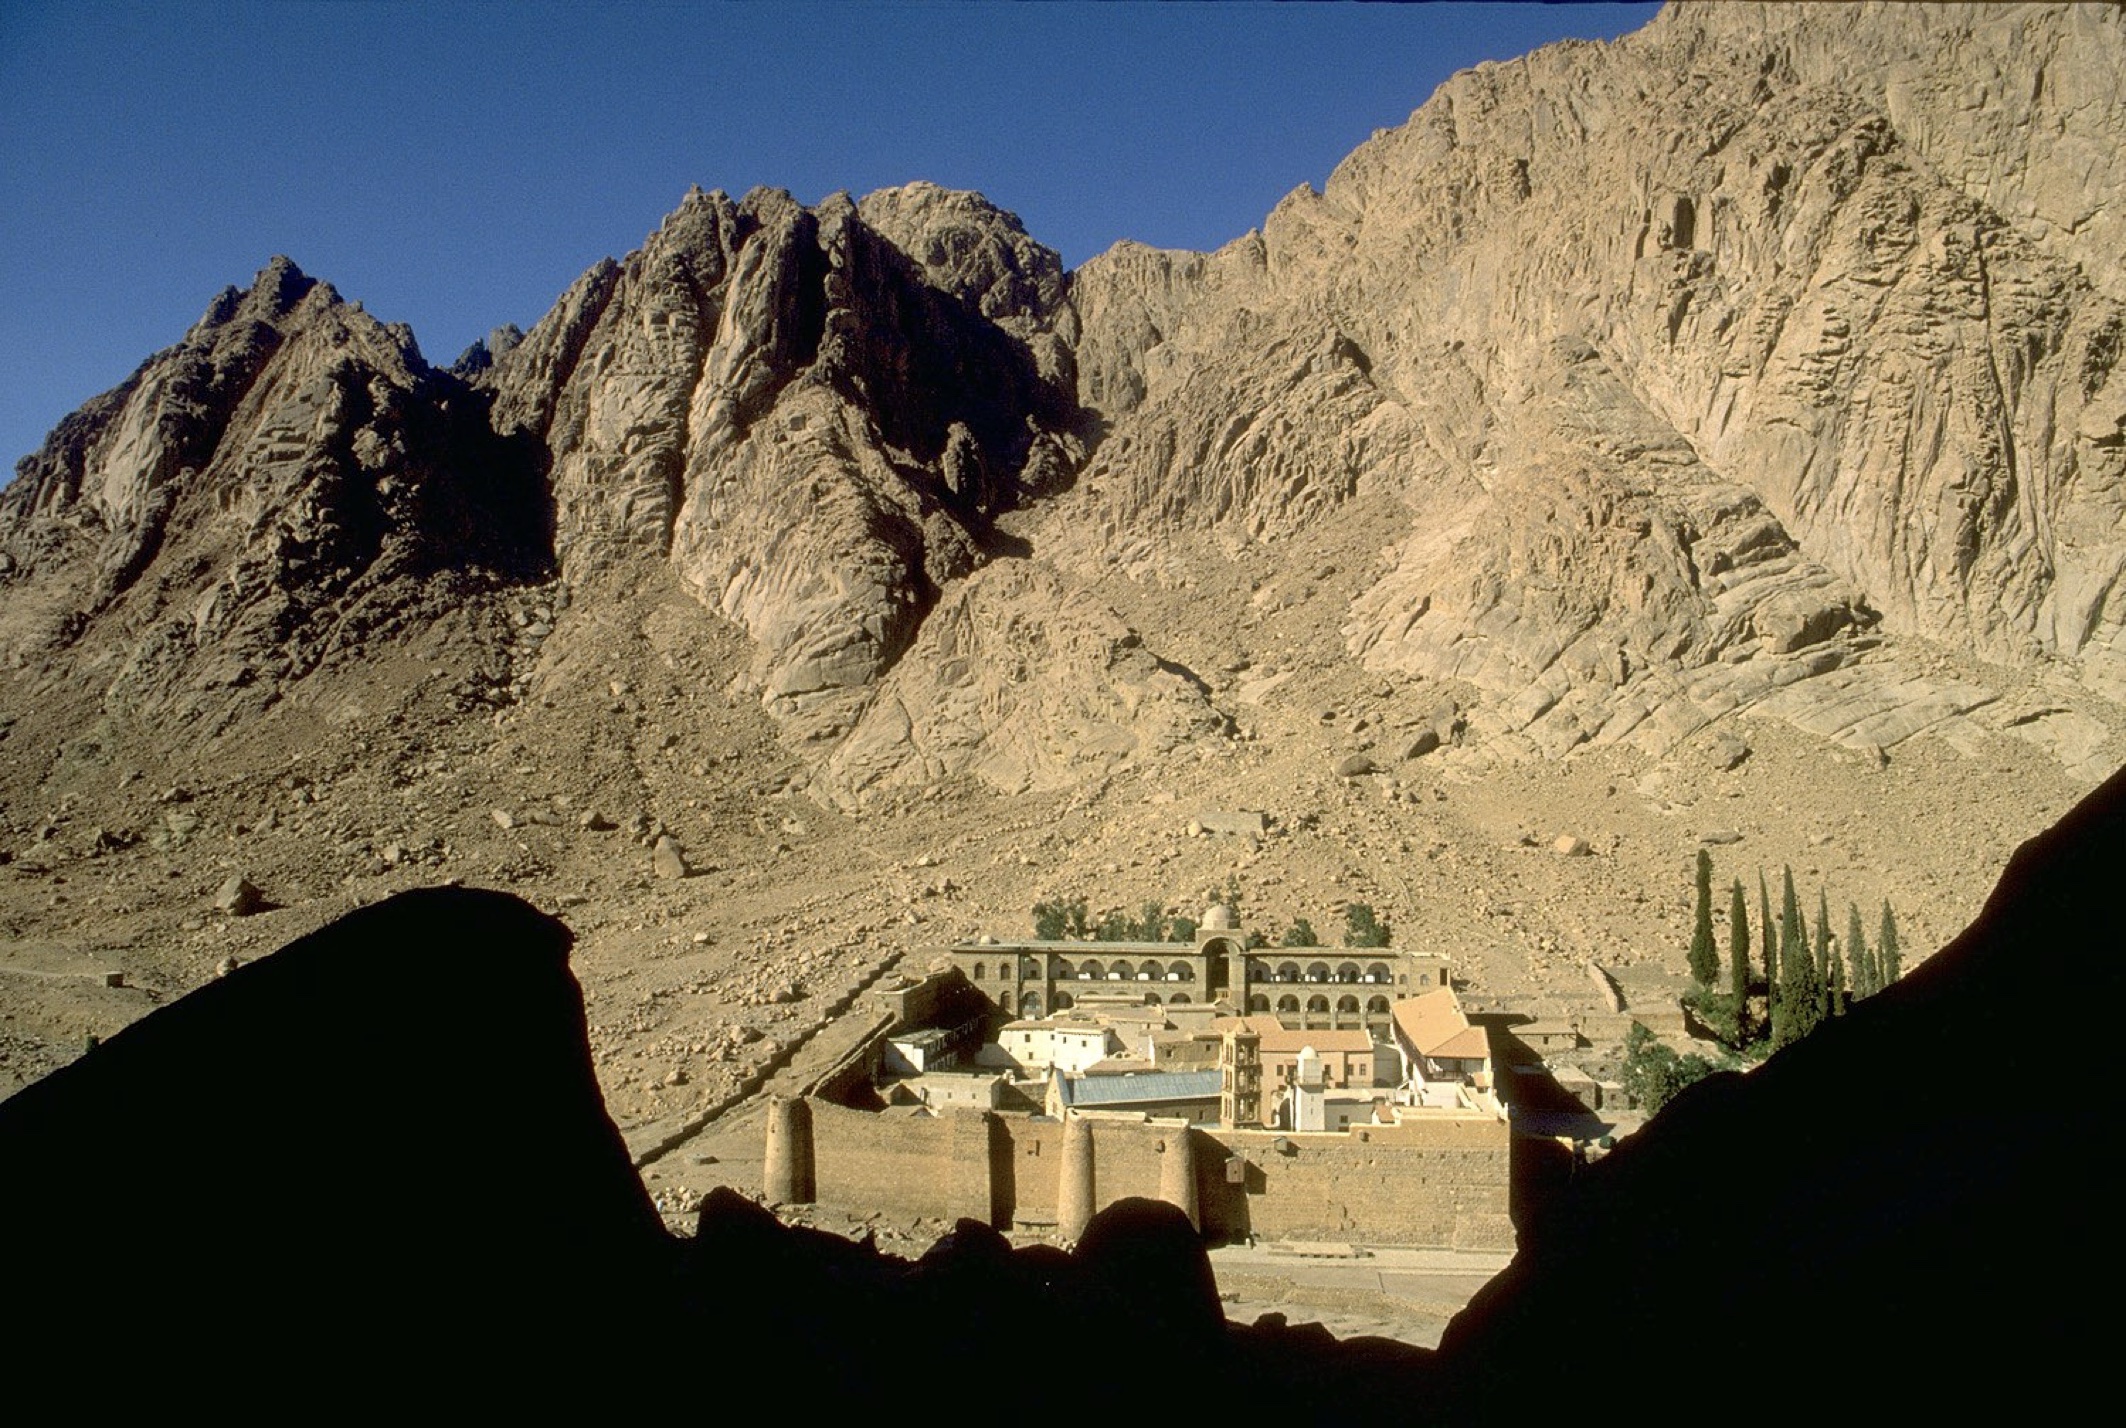 The Monastery of St. Catherine at the foot of Jebel Musa (Mount Sinai), Egypt.